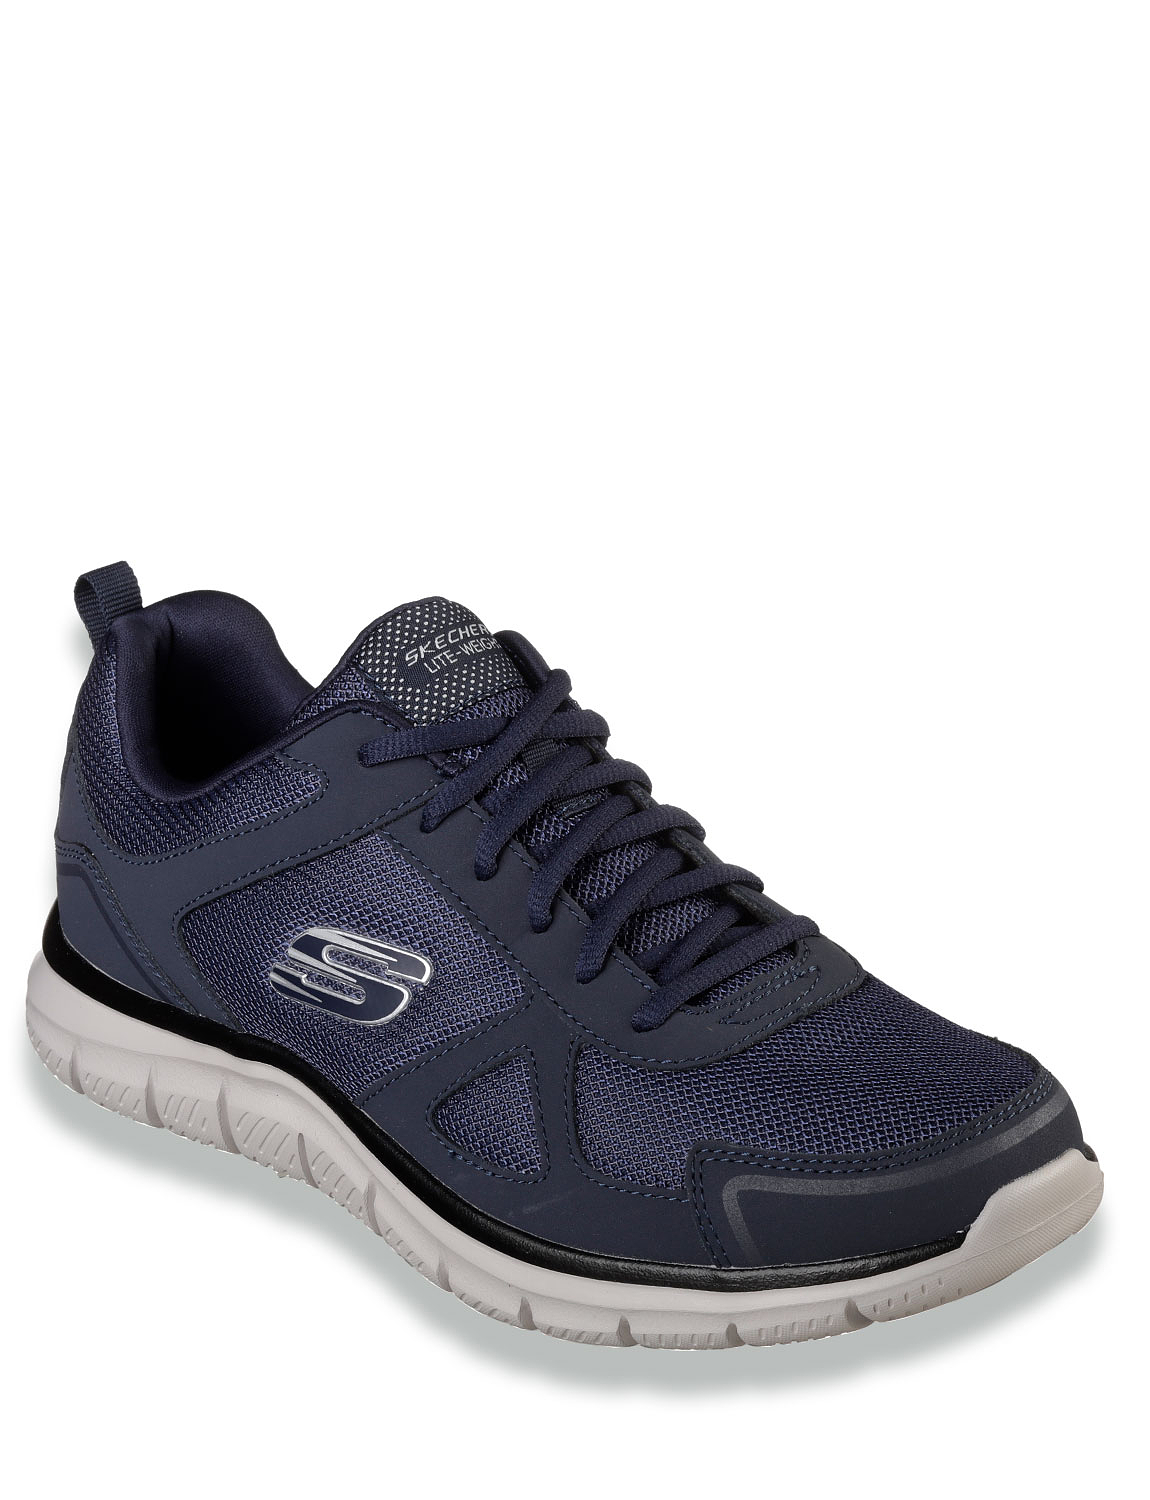 Skechers Track Scloric Lace Trainer | Chums